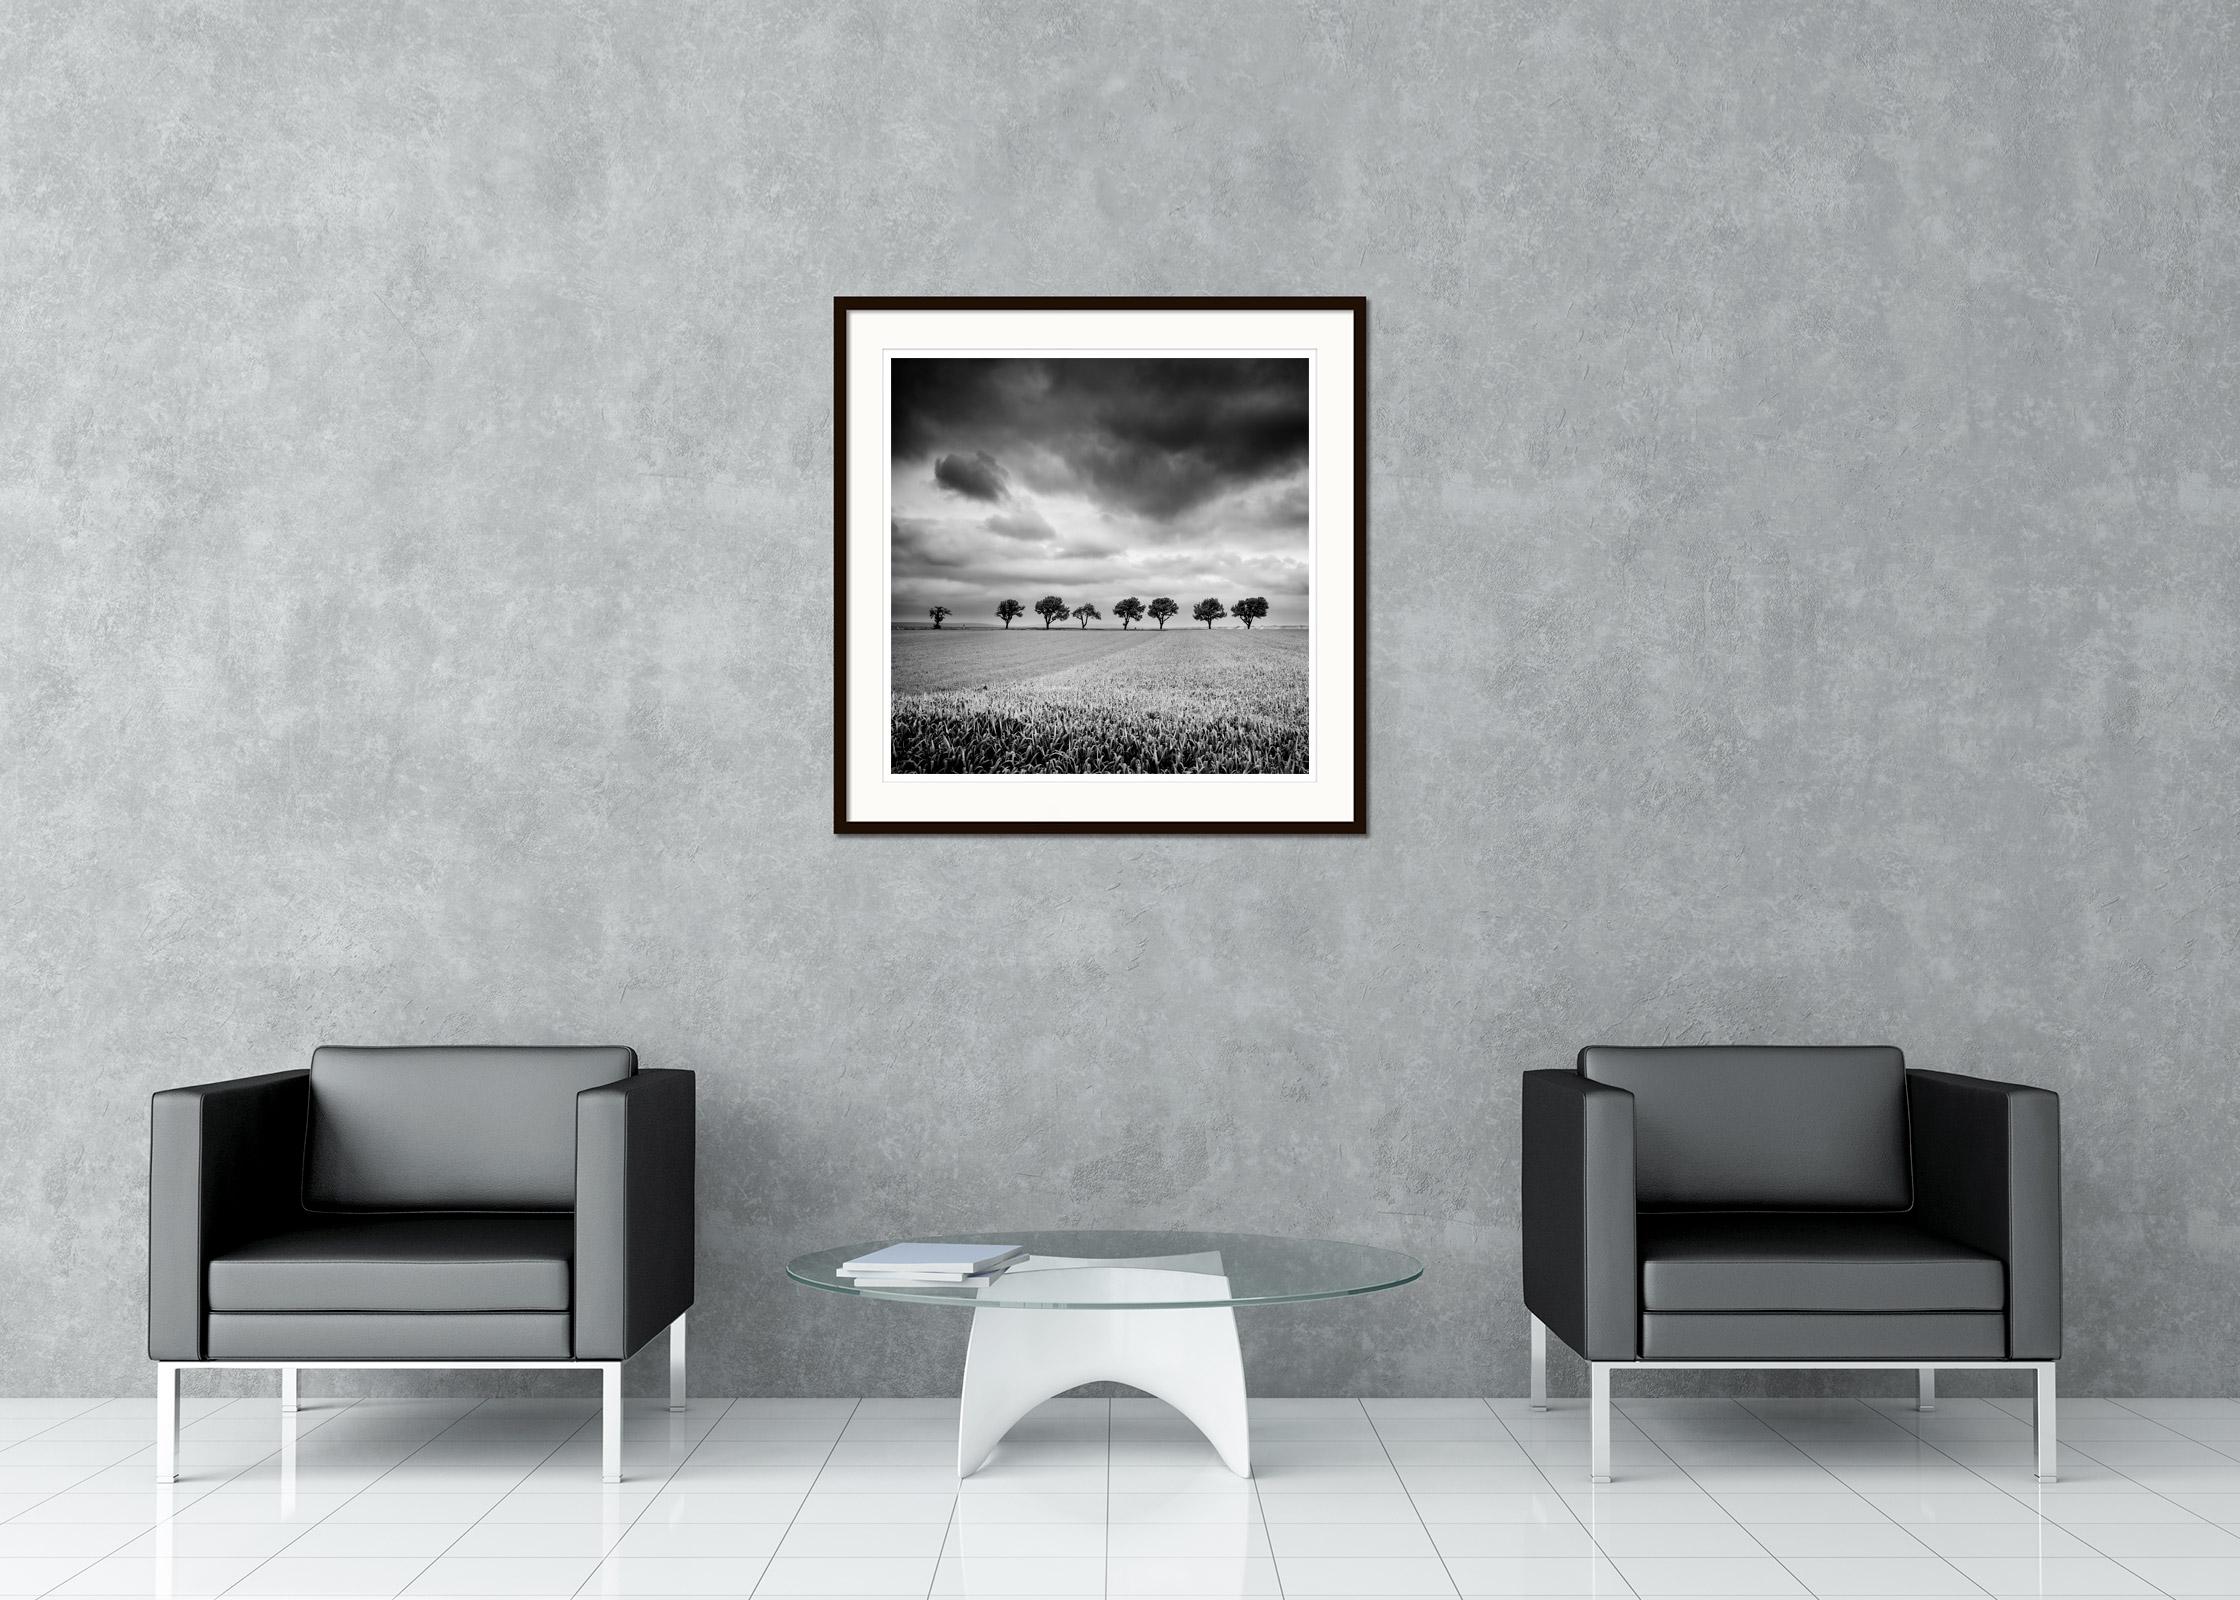 Eleven Cherry Trees, stormy Clouds, black and white, landscape, art photography - Contemporary Print by Gerald Berghammer